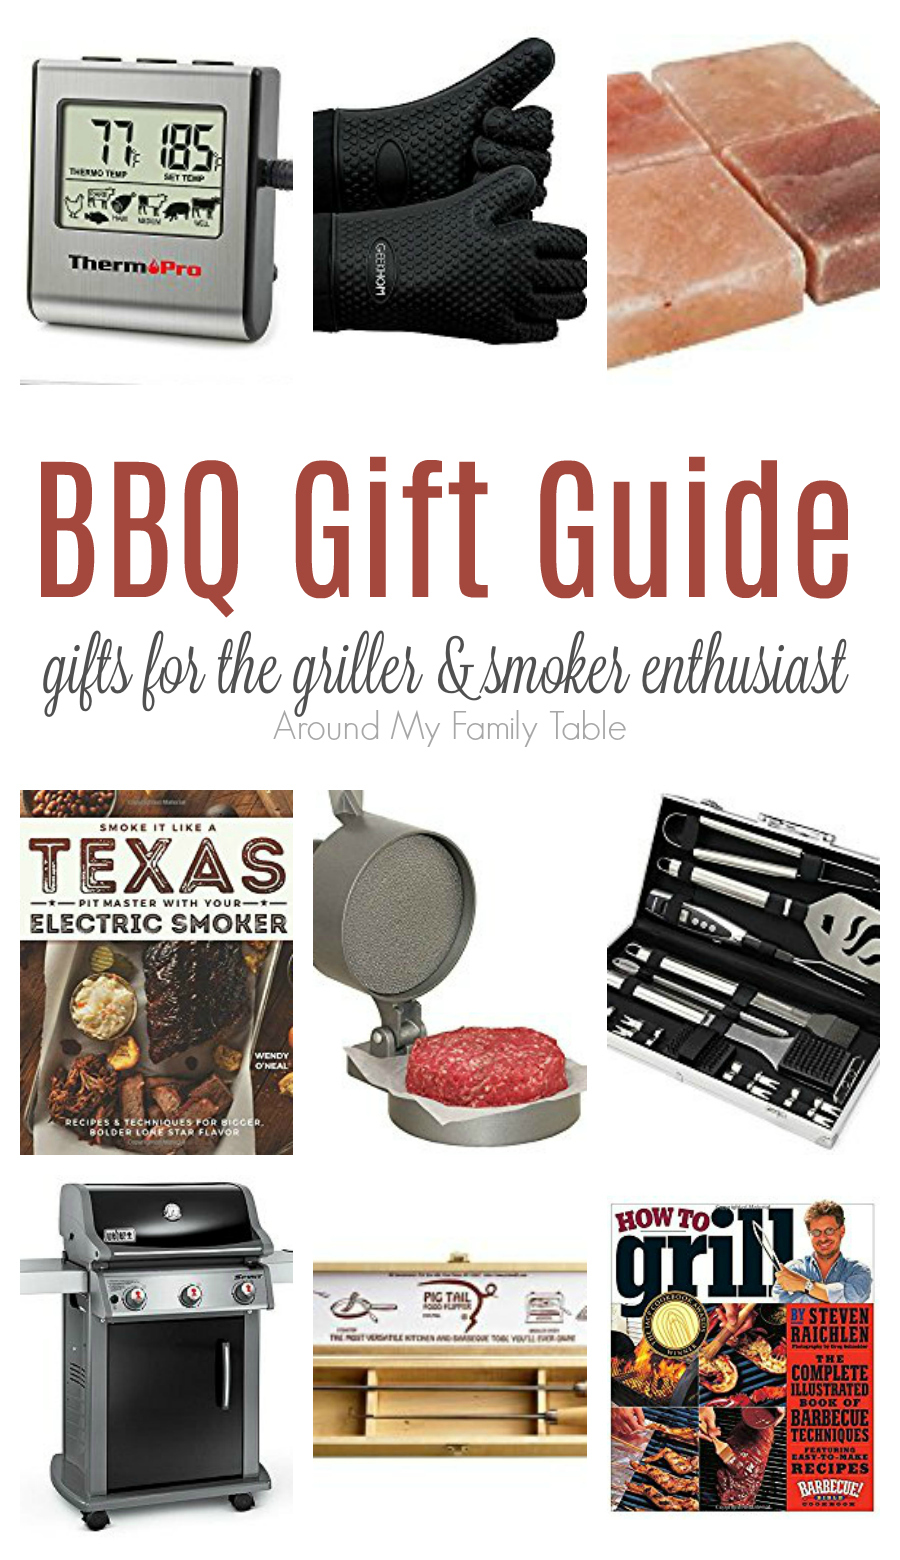 BBQ Gift Guide - Around My Family Table